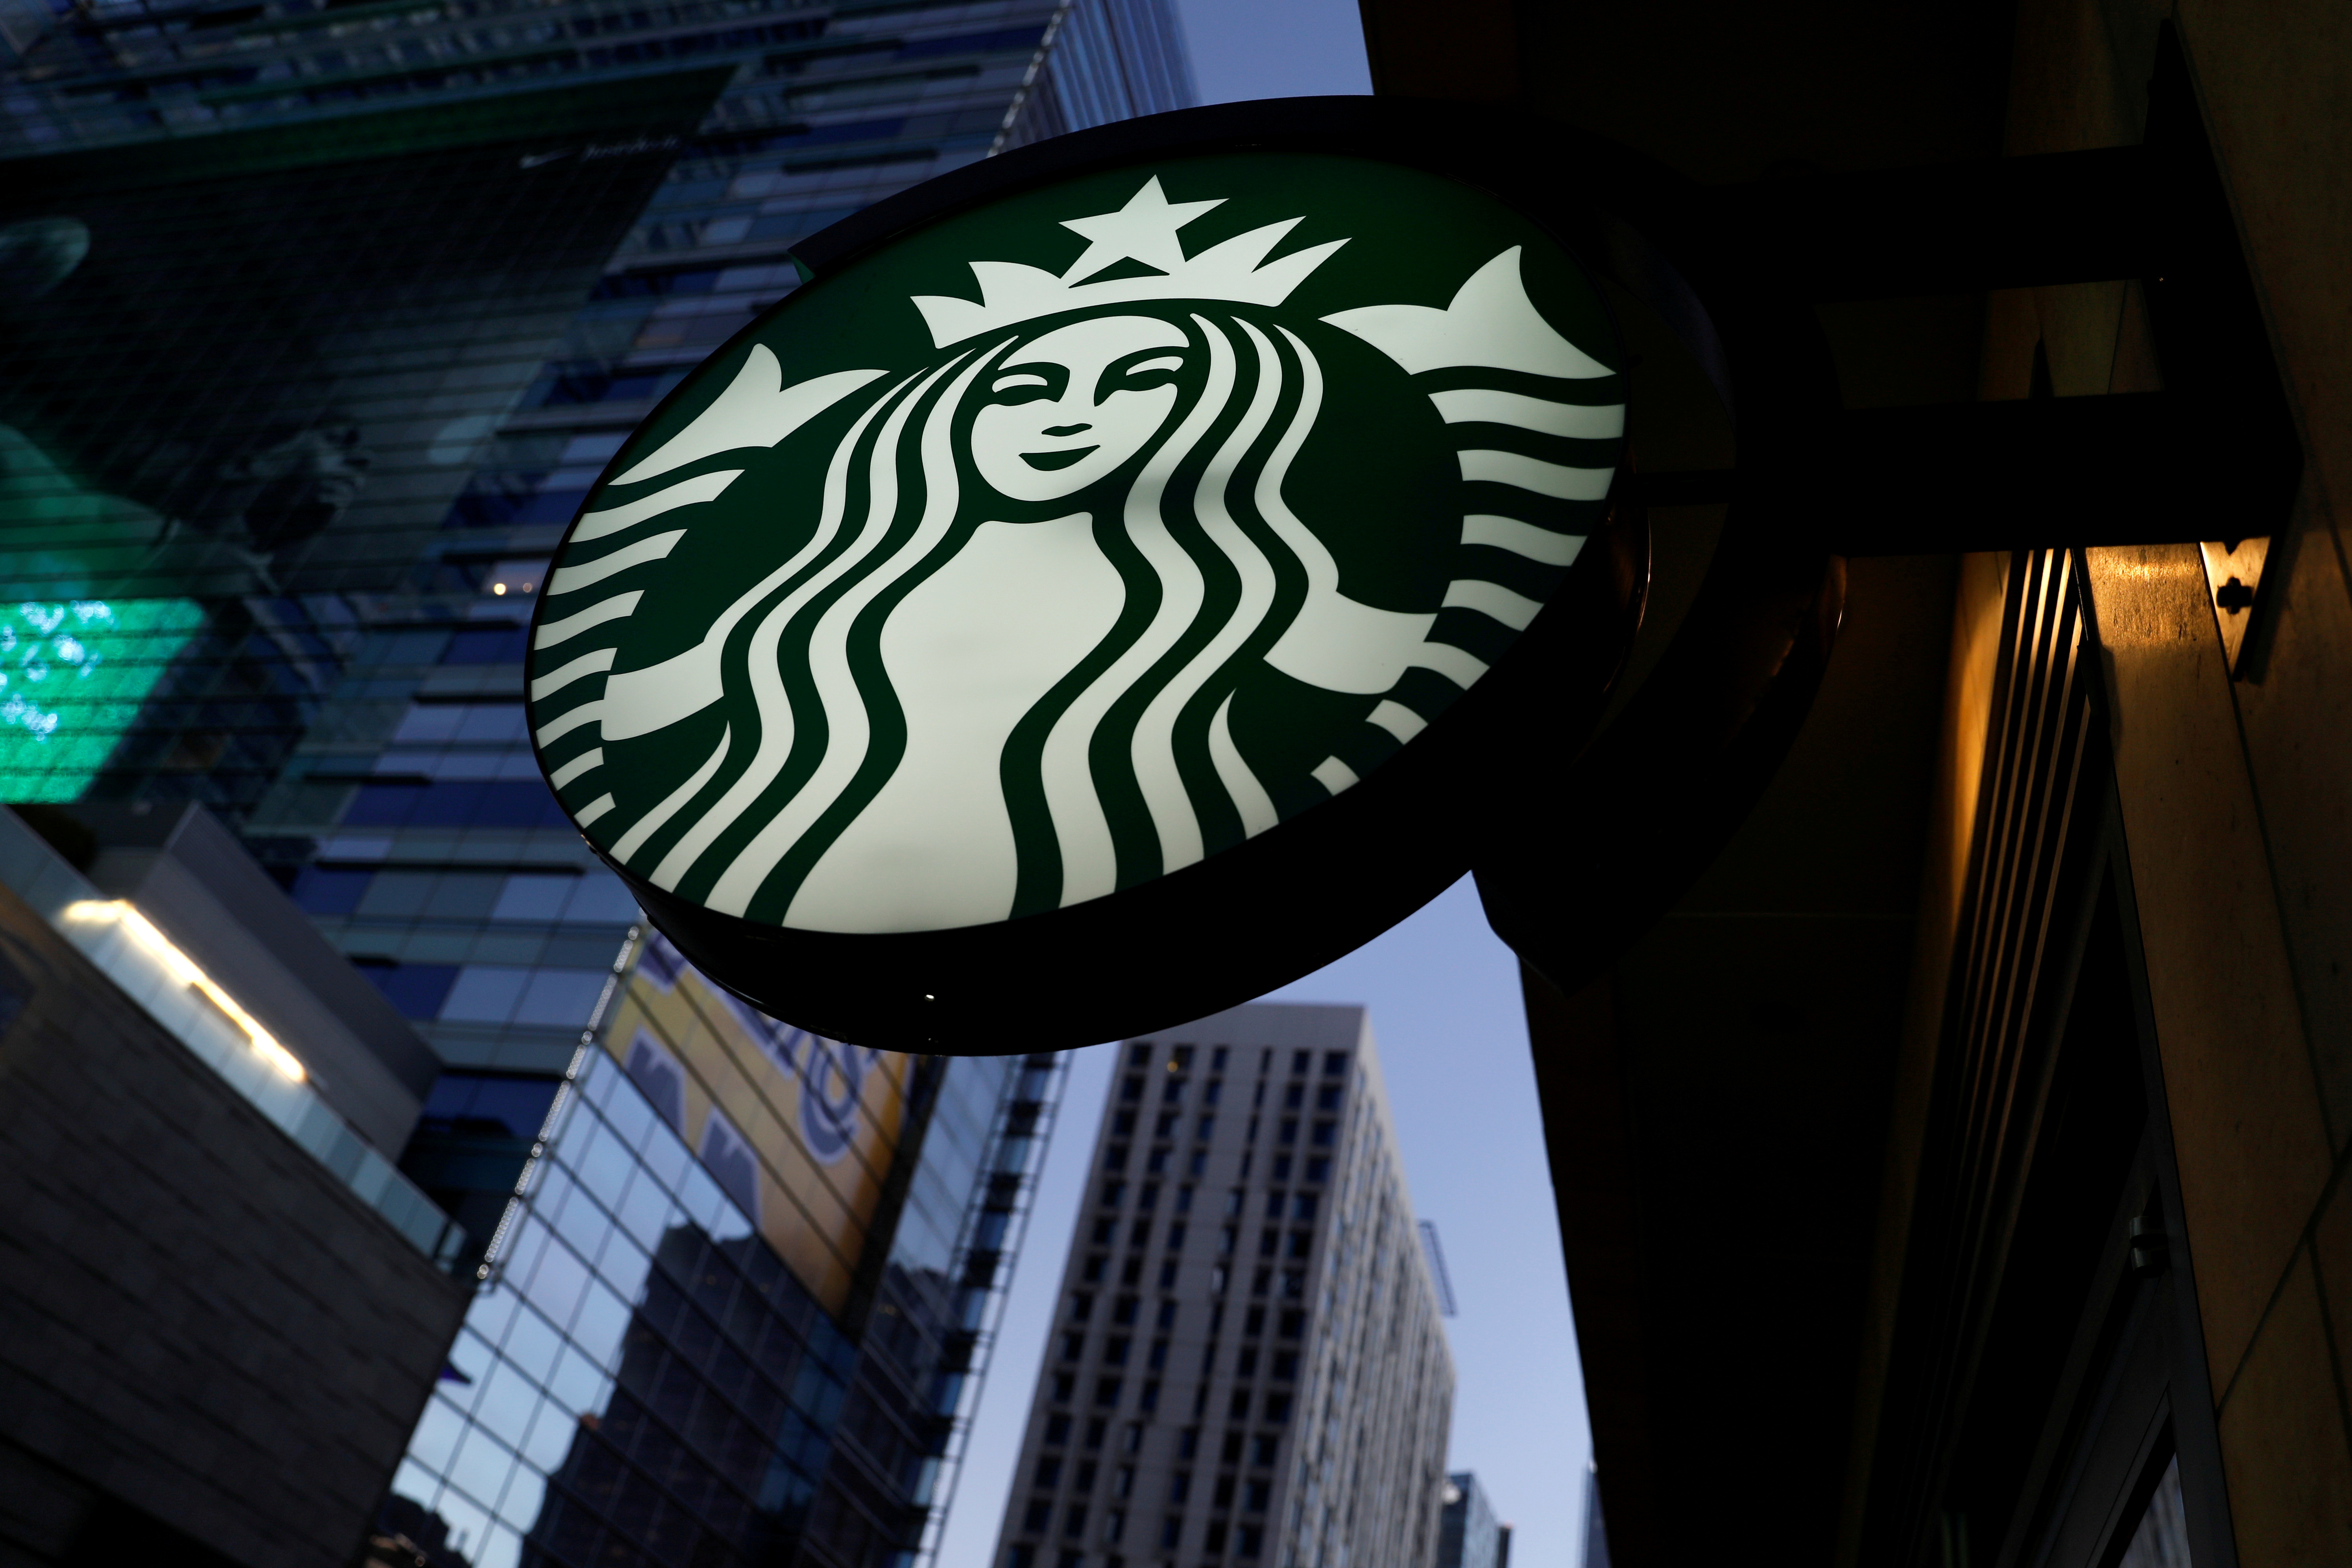 A Starbucks sign is shown on one of the company's stores in Los Angeles